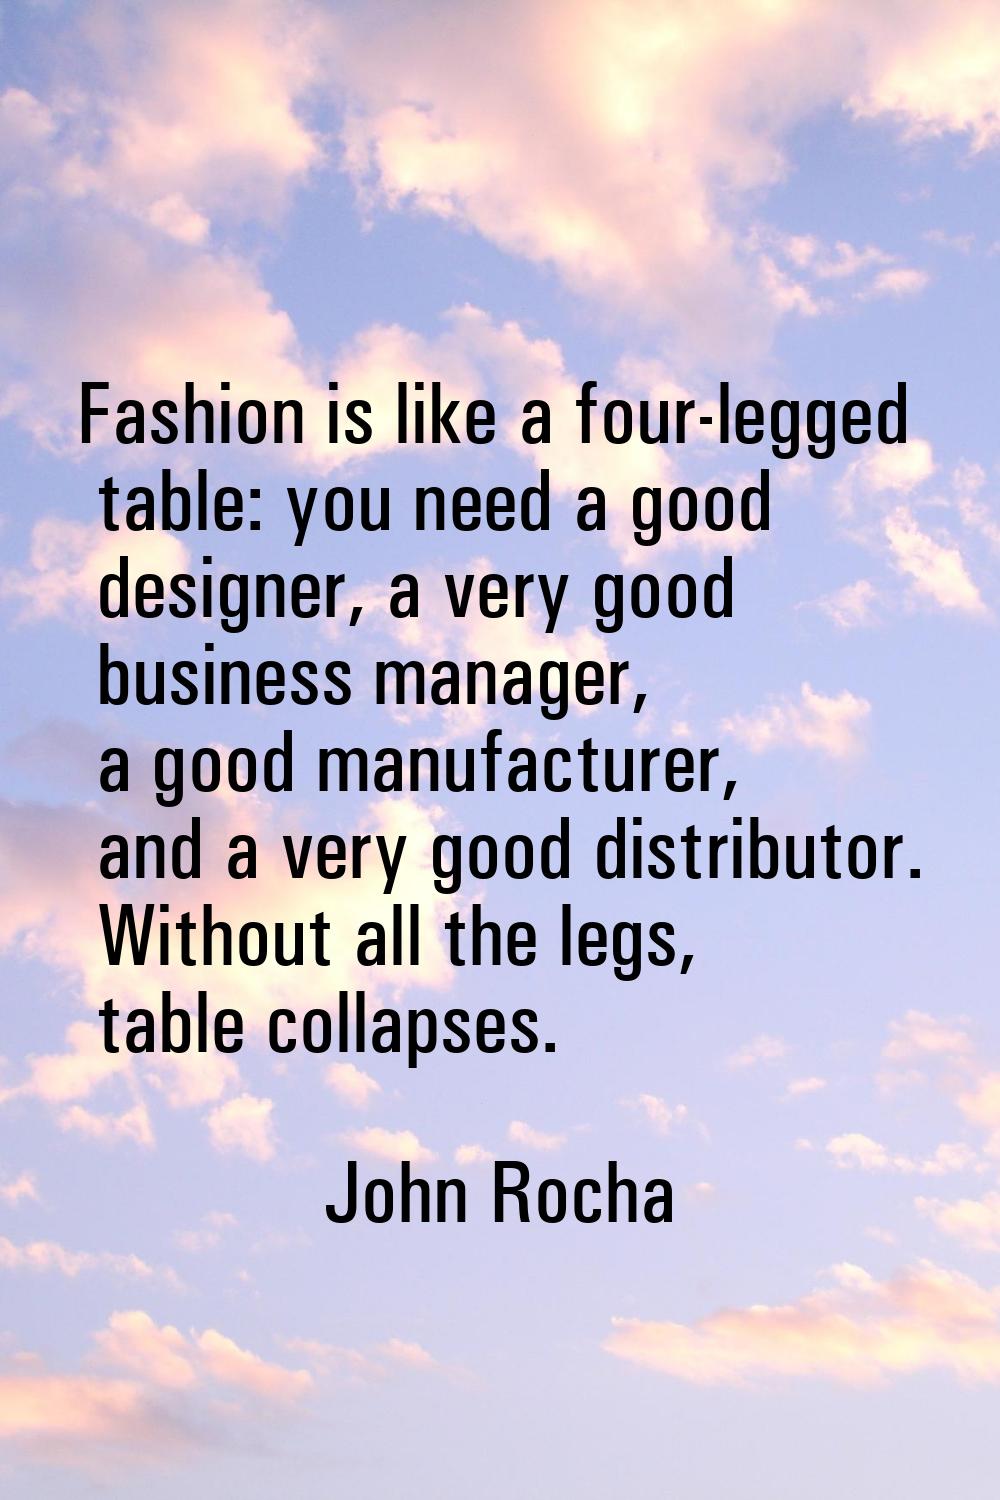 Fashion is like a four-legged table: you need a good designer, a very good business manager, a good